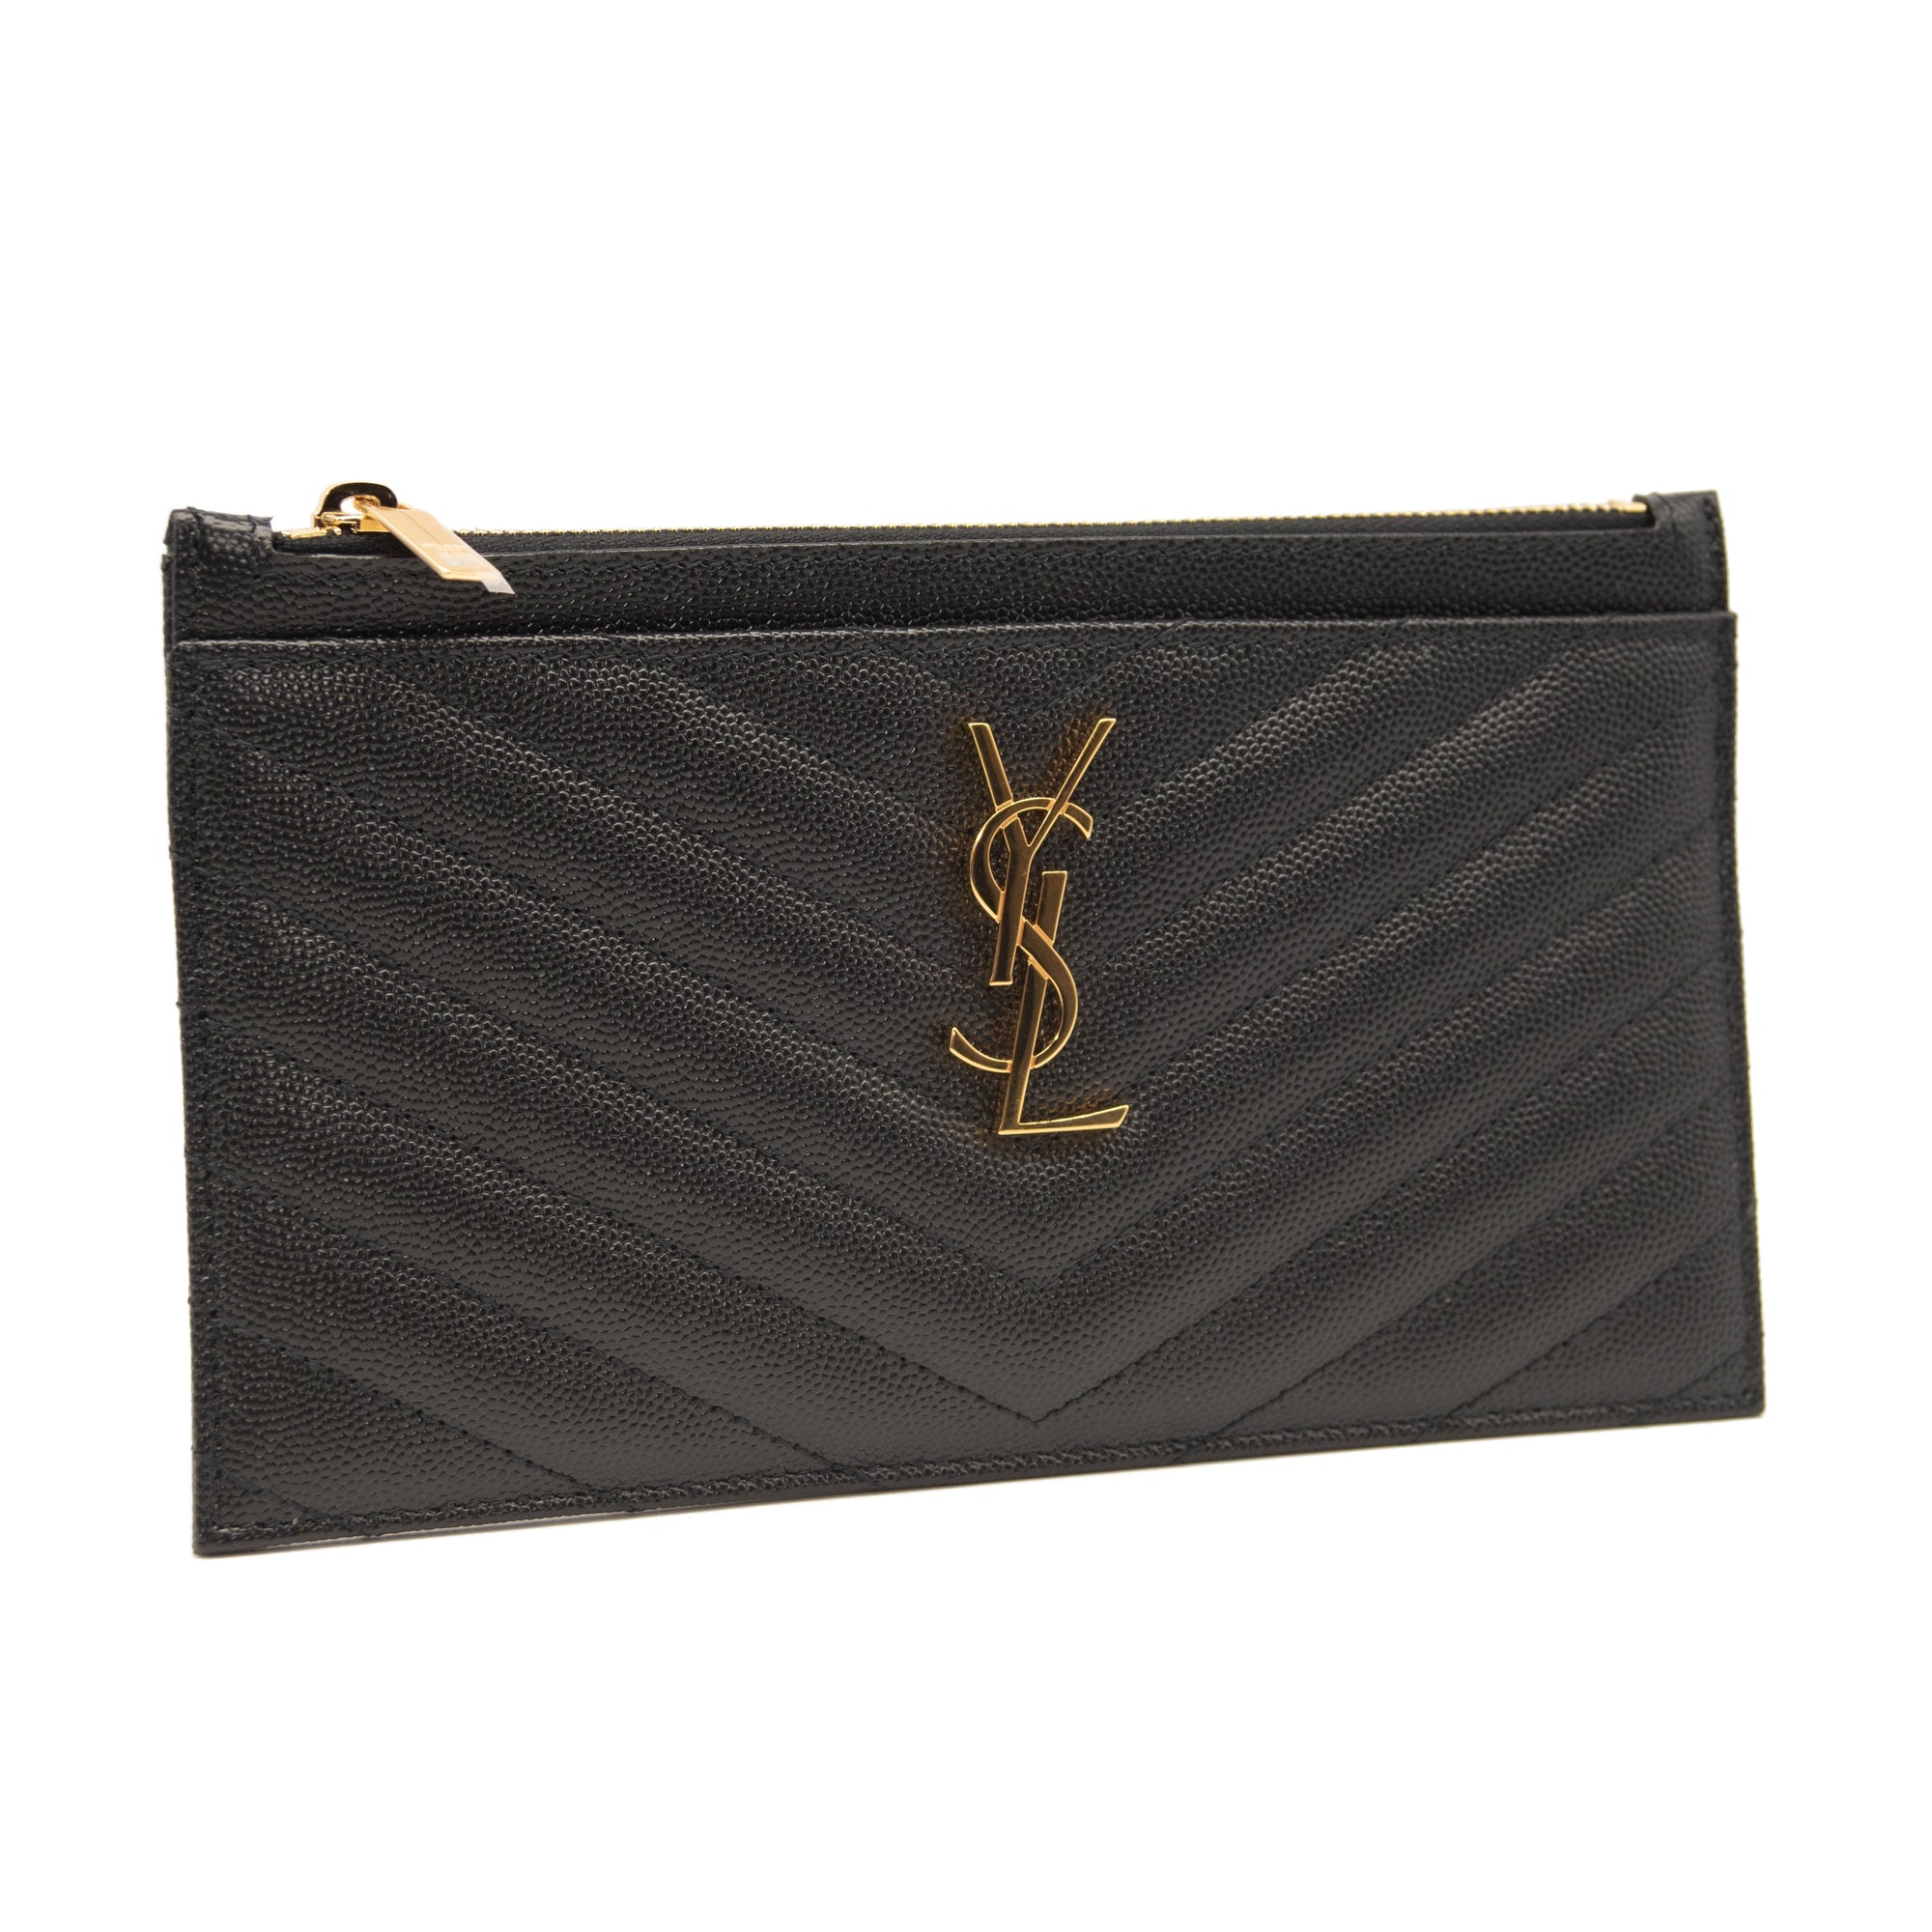 Authentic YSL monogram large bill pouch - like new